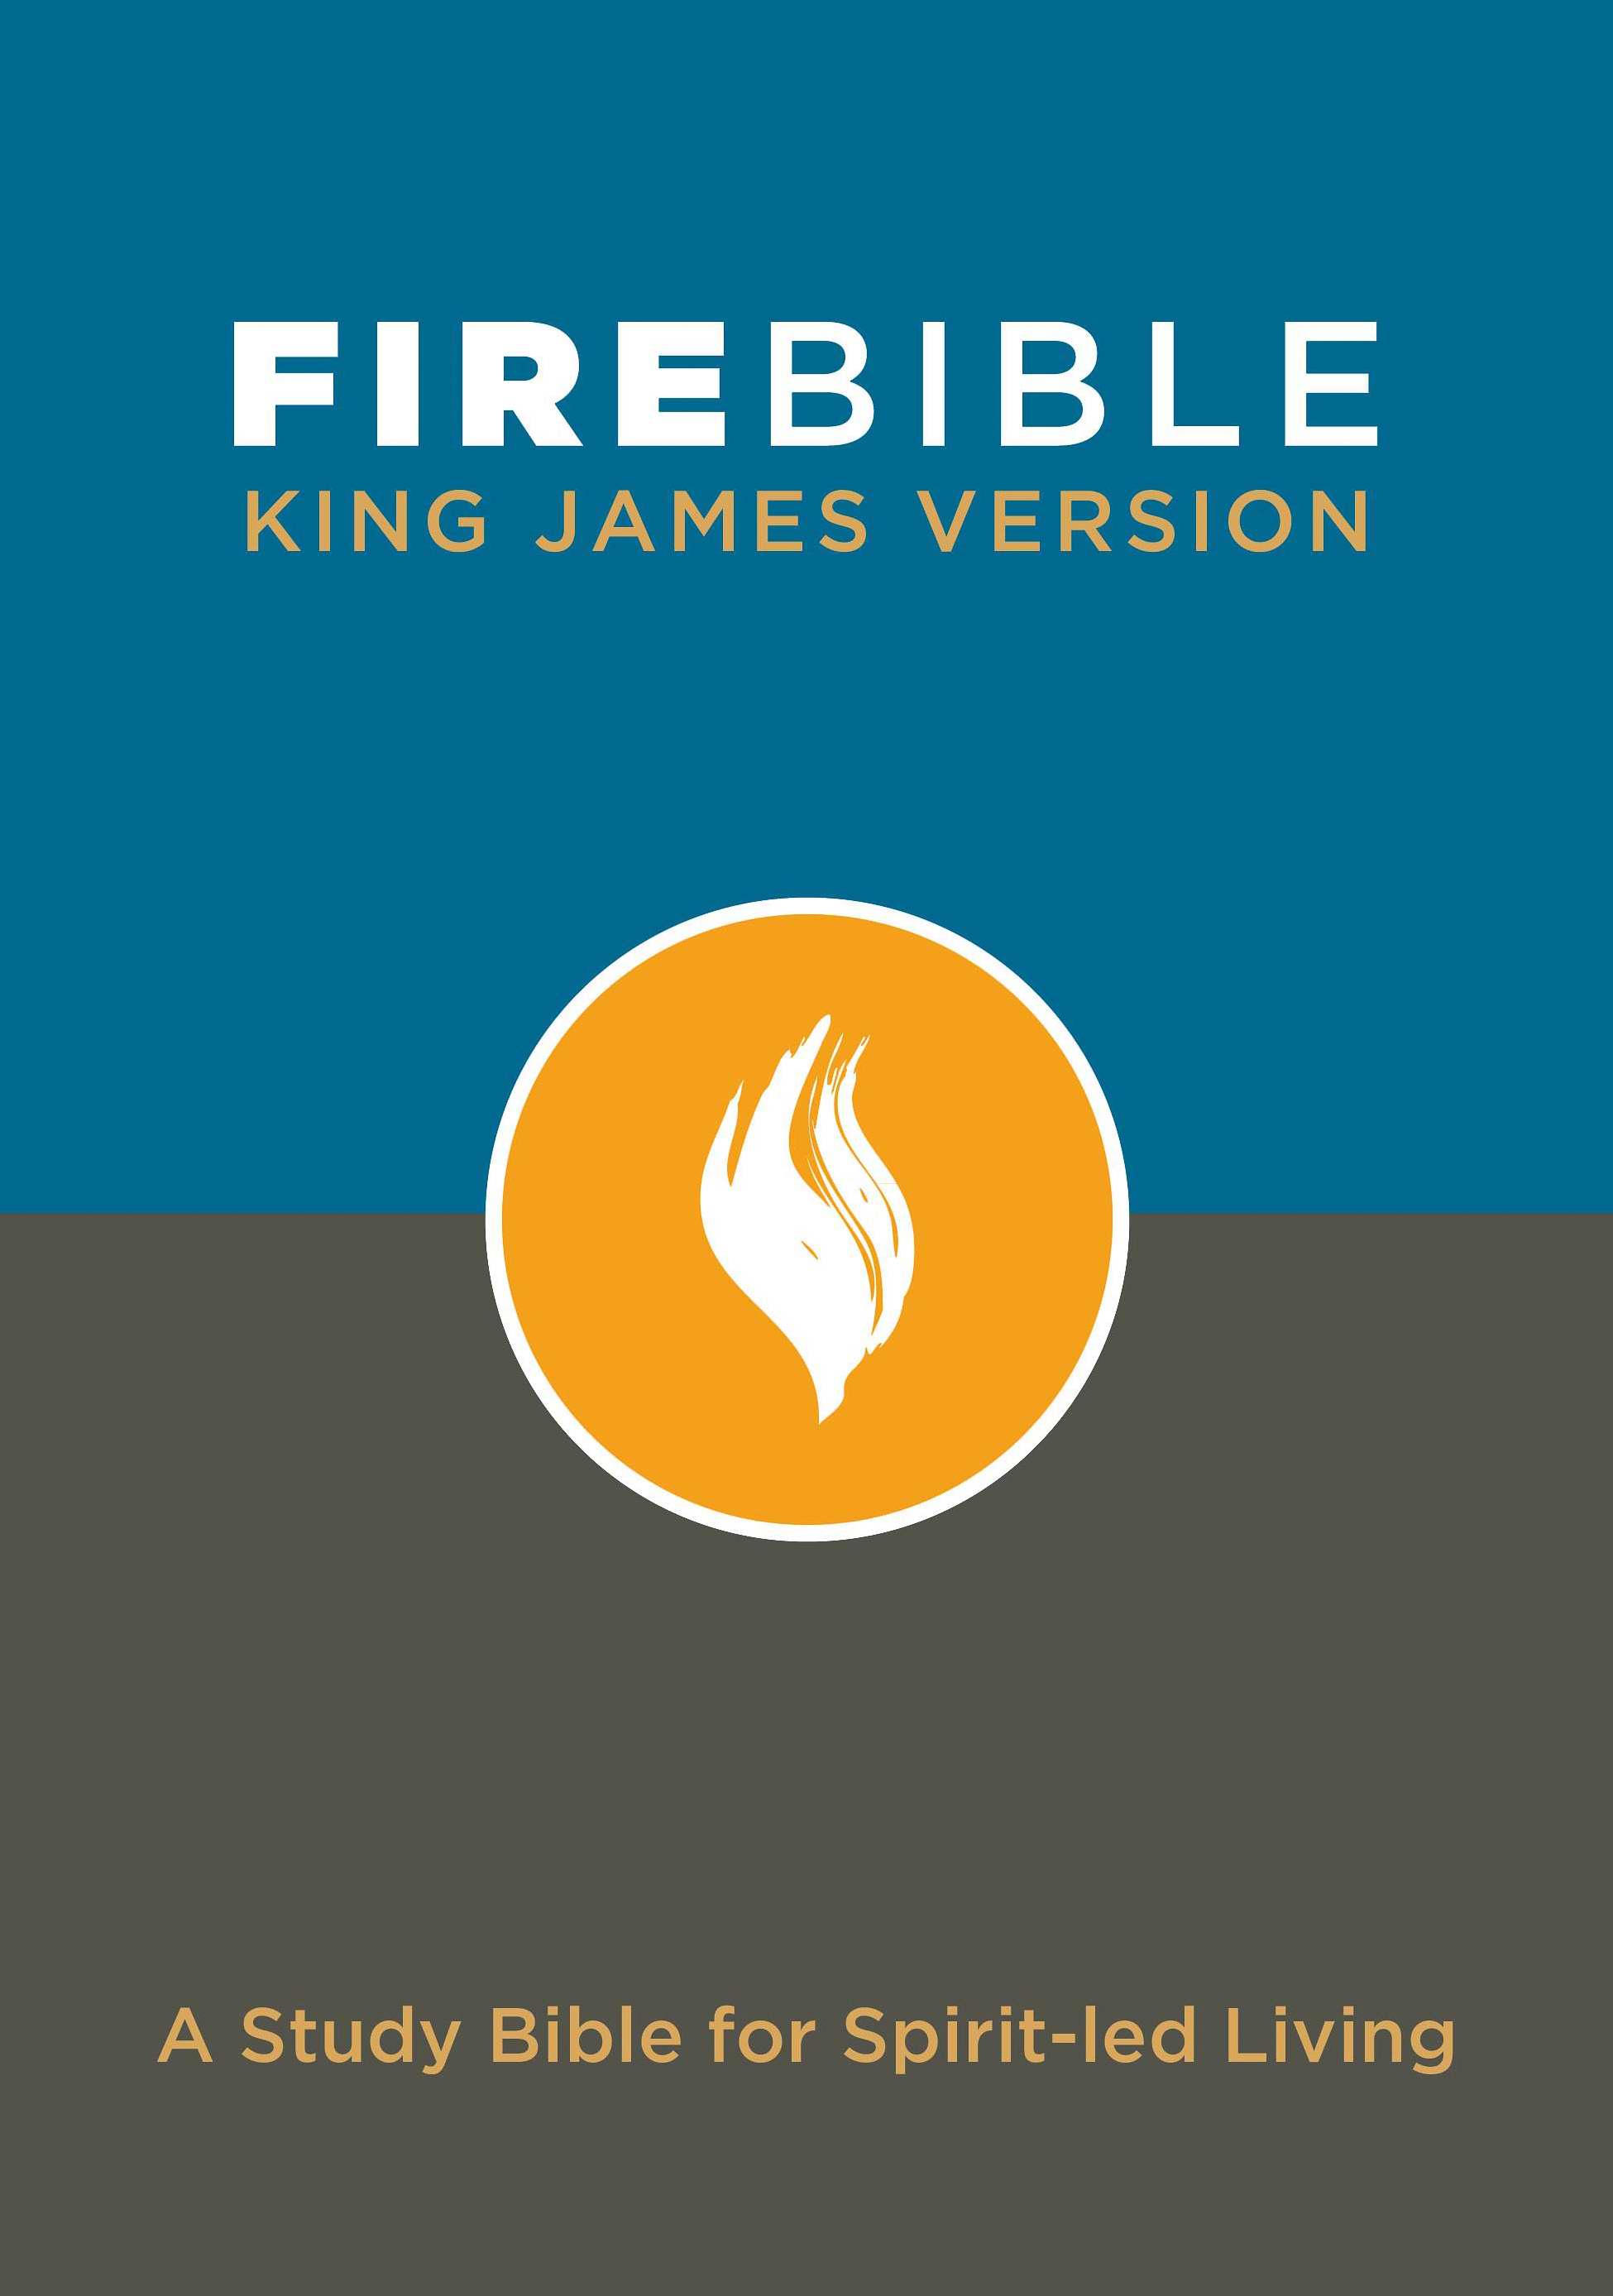 Image of KJV Fire Bible other